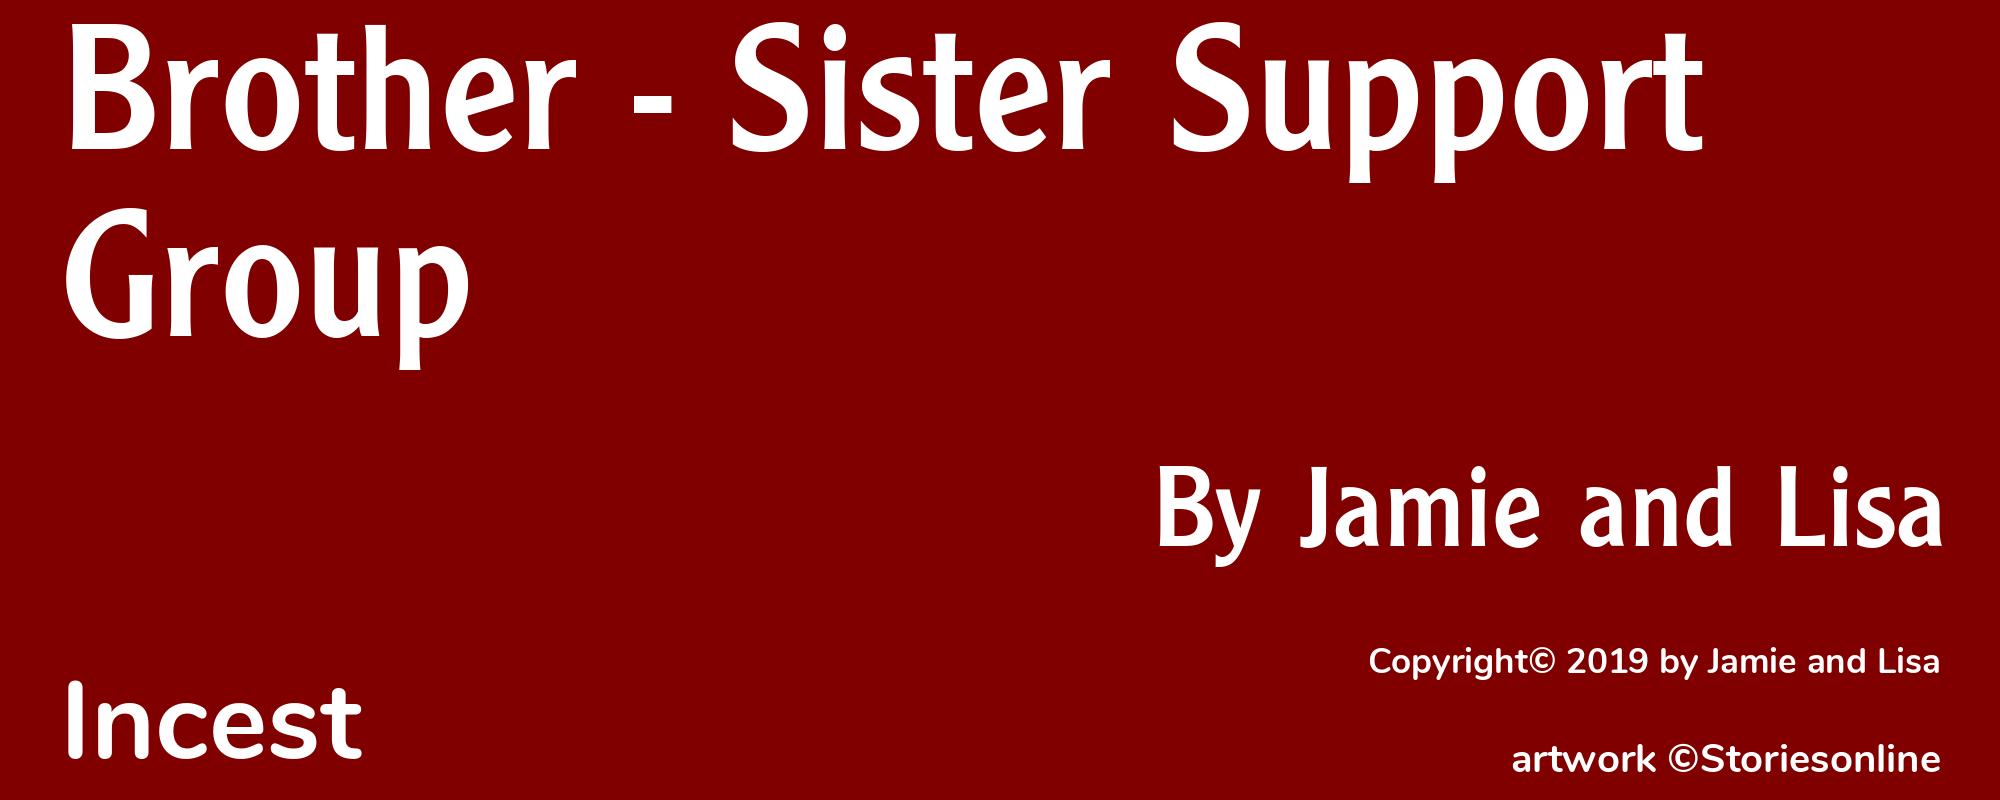 Brother - Sister Support Group - Cover